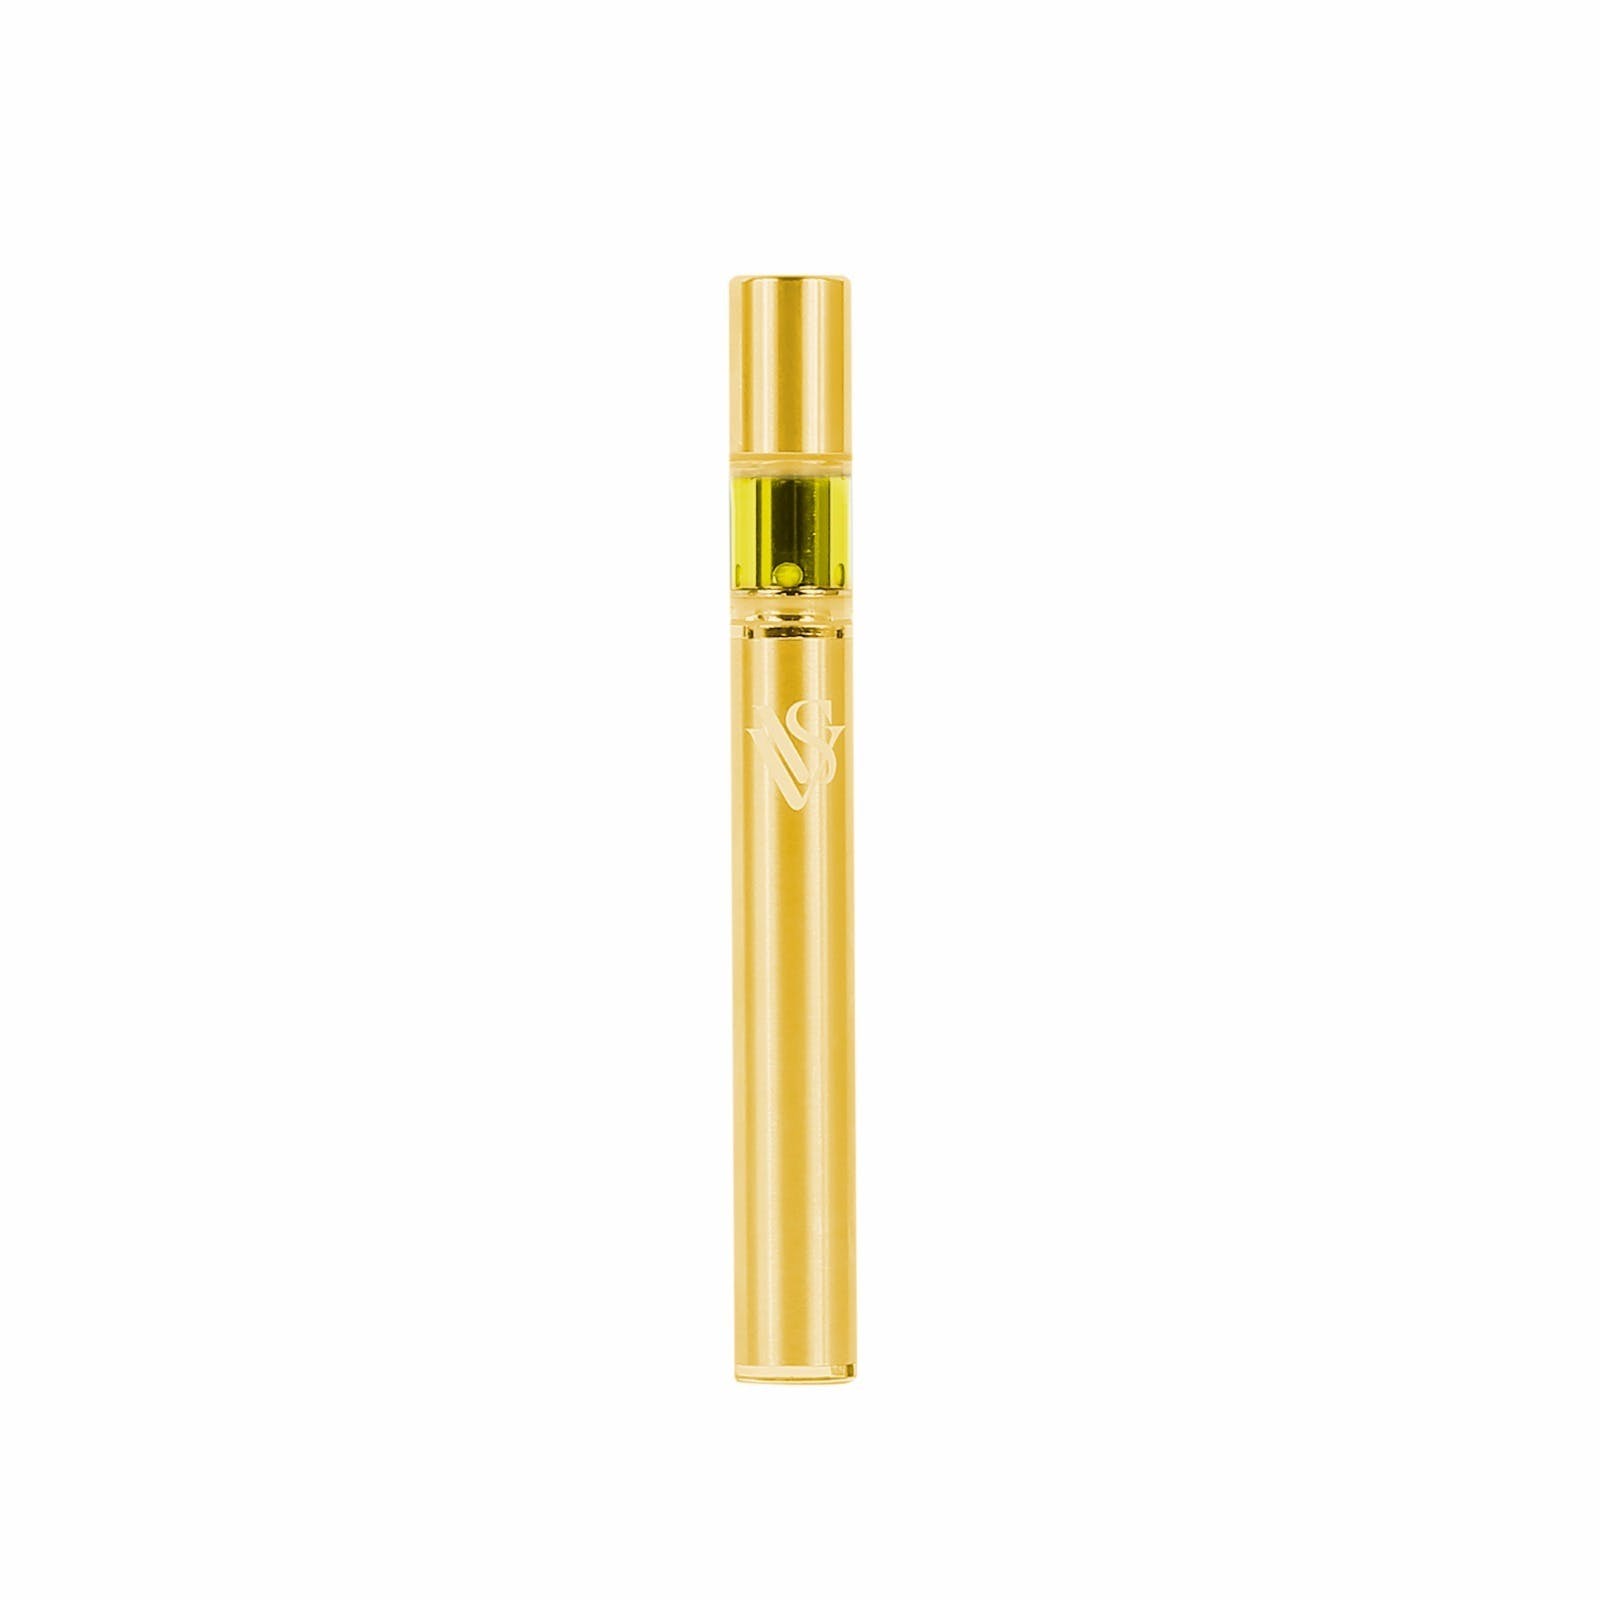 DISPOSABLE PENS GOLD - CCELL TECHNOLOGY